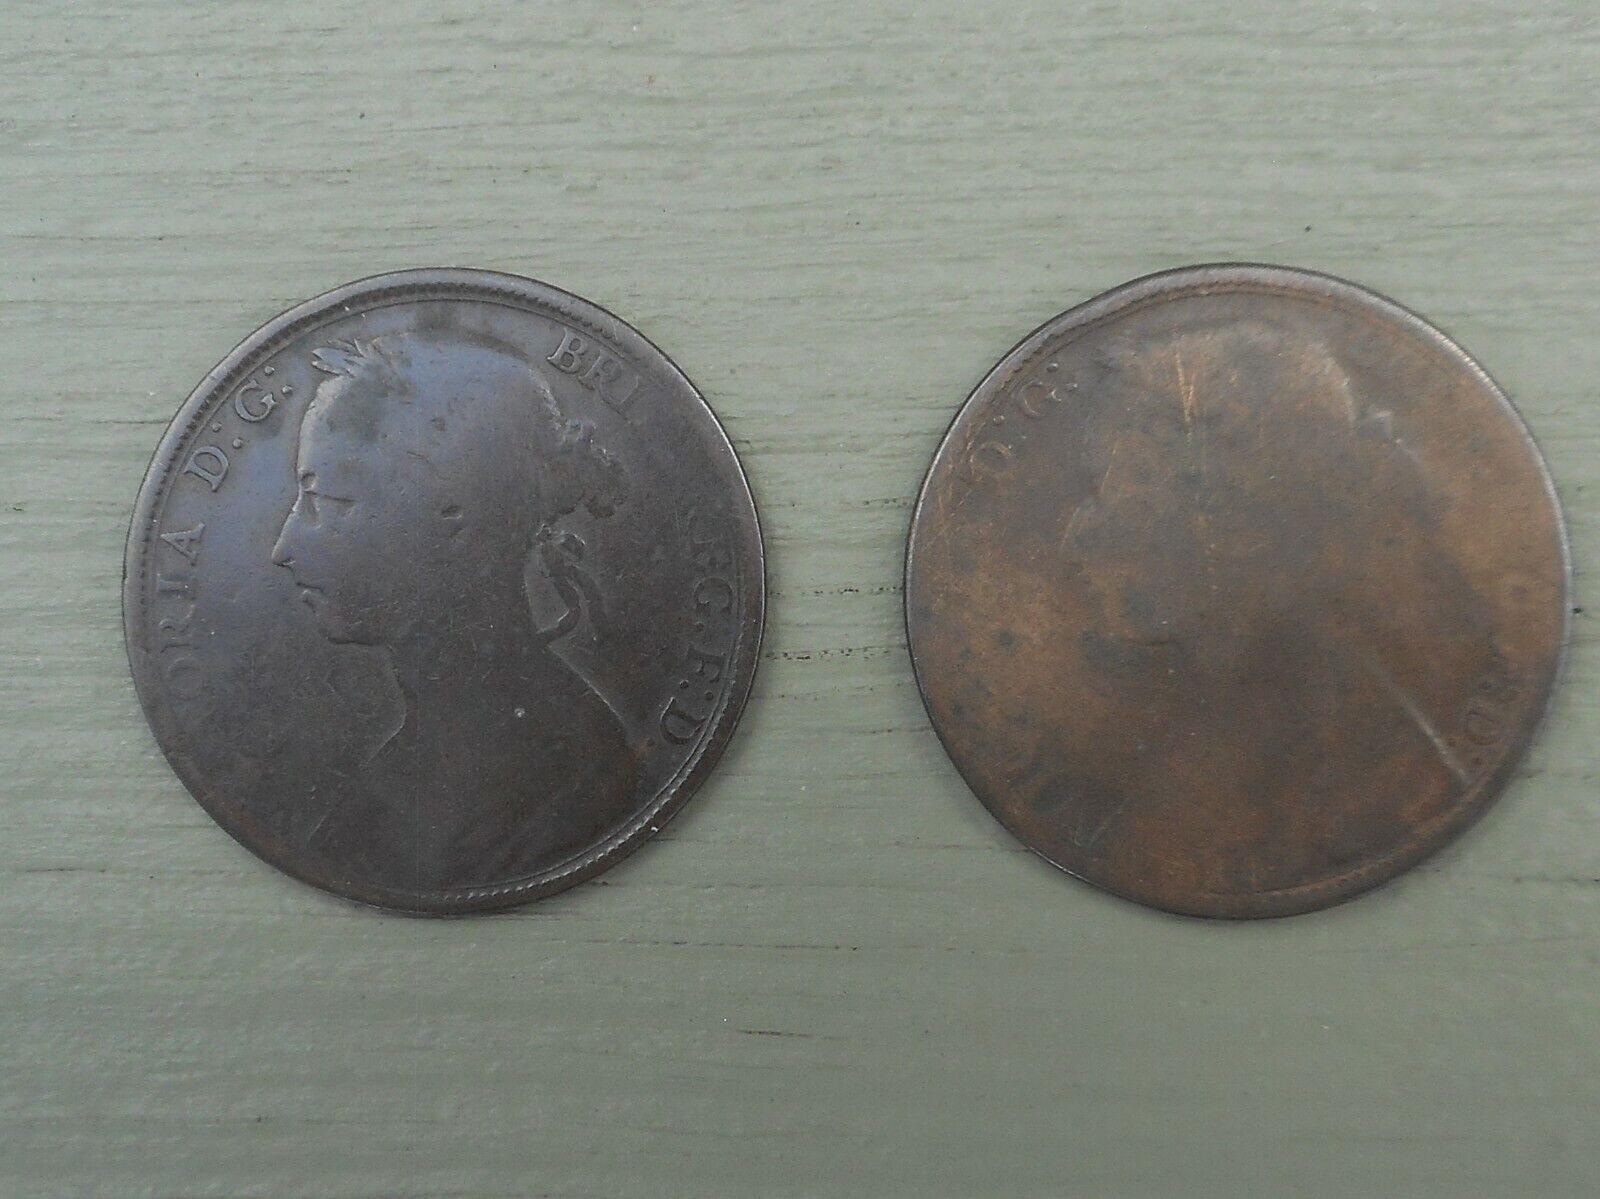 1877 & 1890 LOT OF 2 COINS BRITAIN One Penny 1 Pence Cent Queen Victoria Без бренда - фотография #4